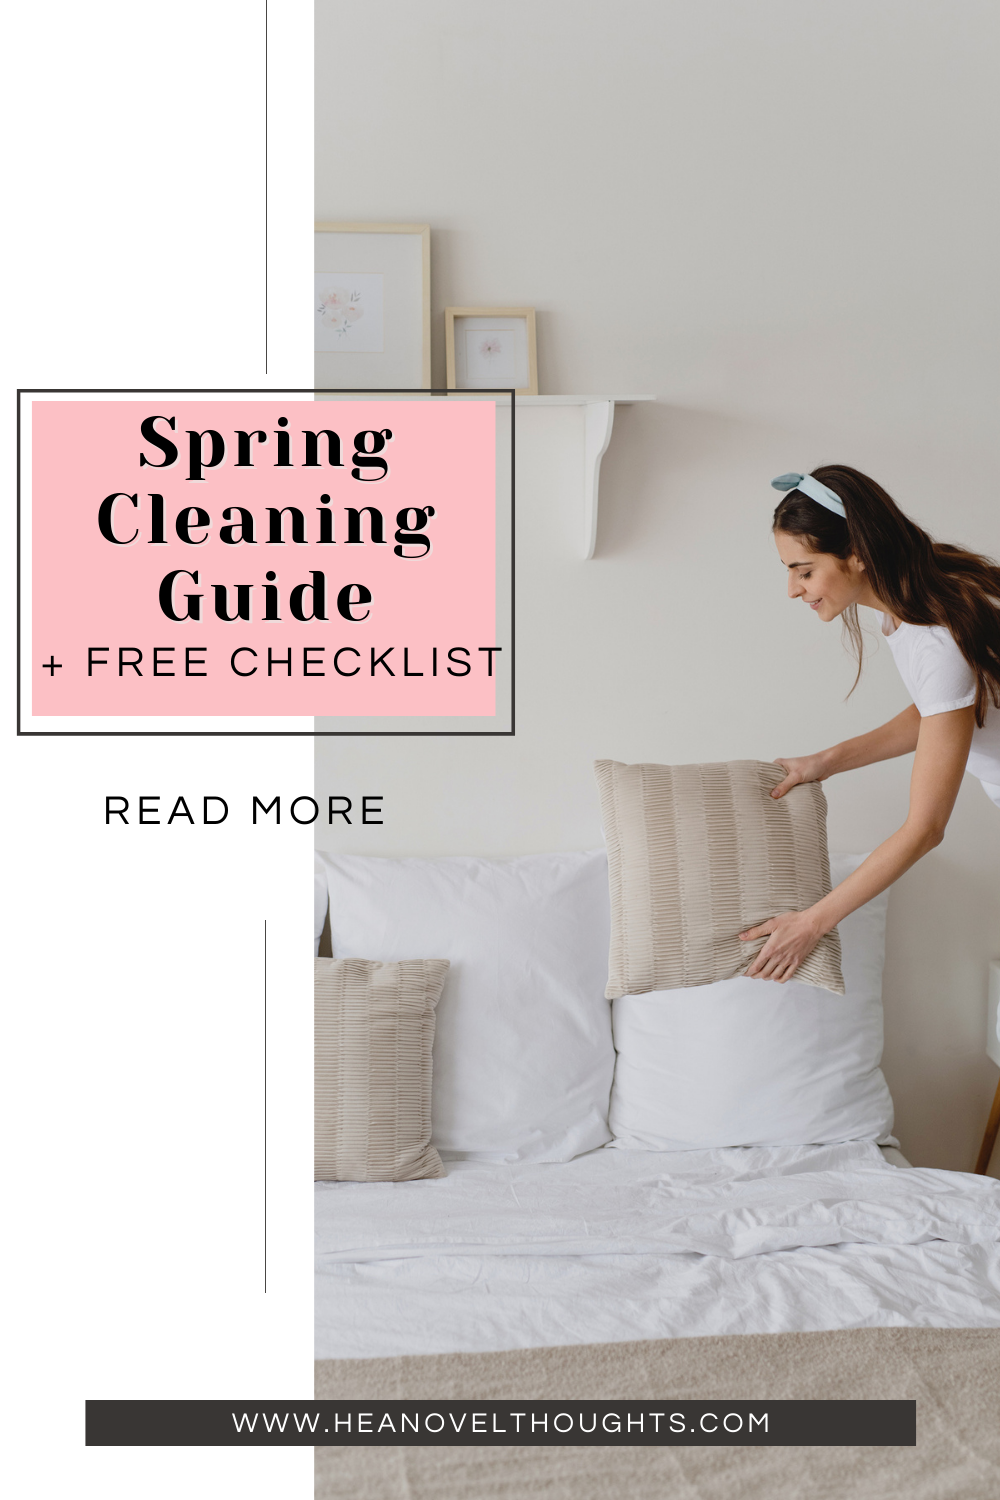 Spring Cleaning Guide + Free Checklist!